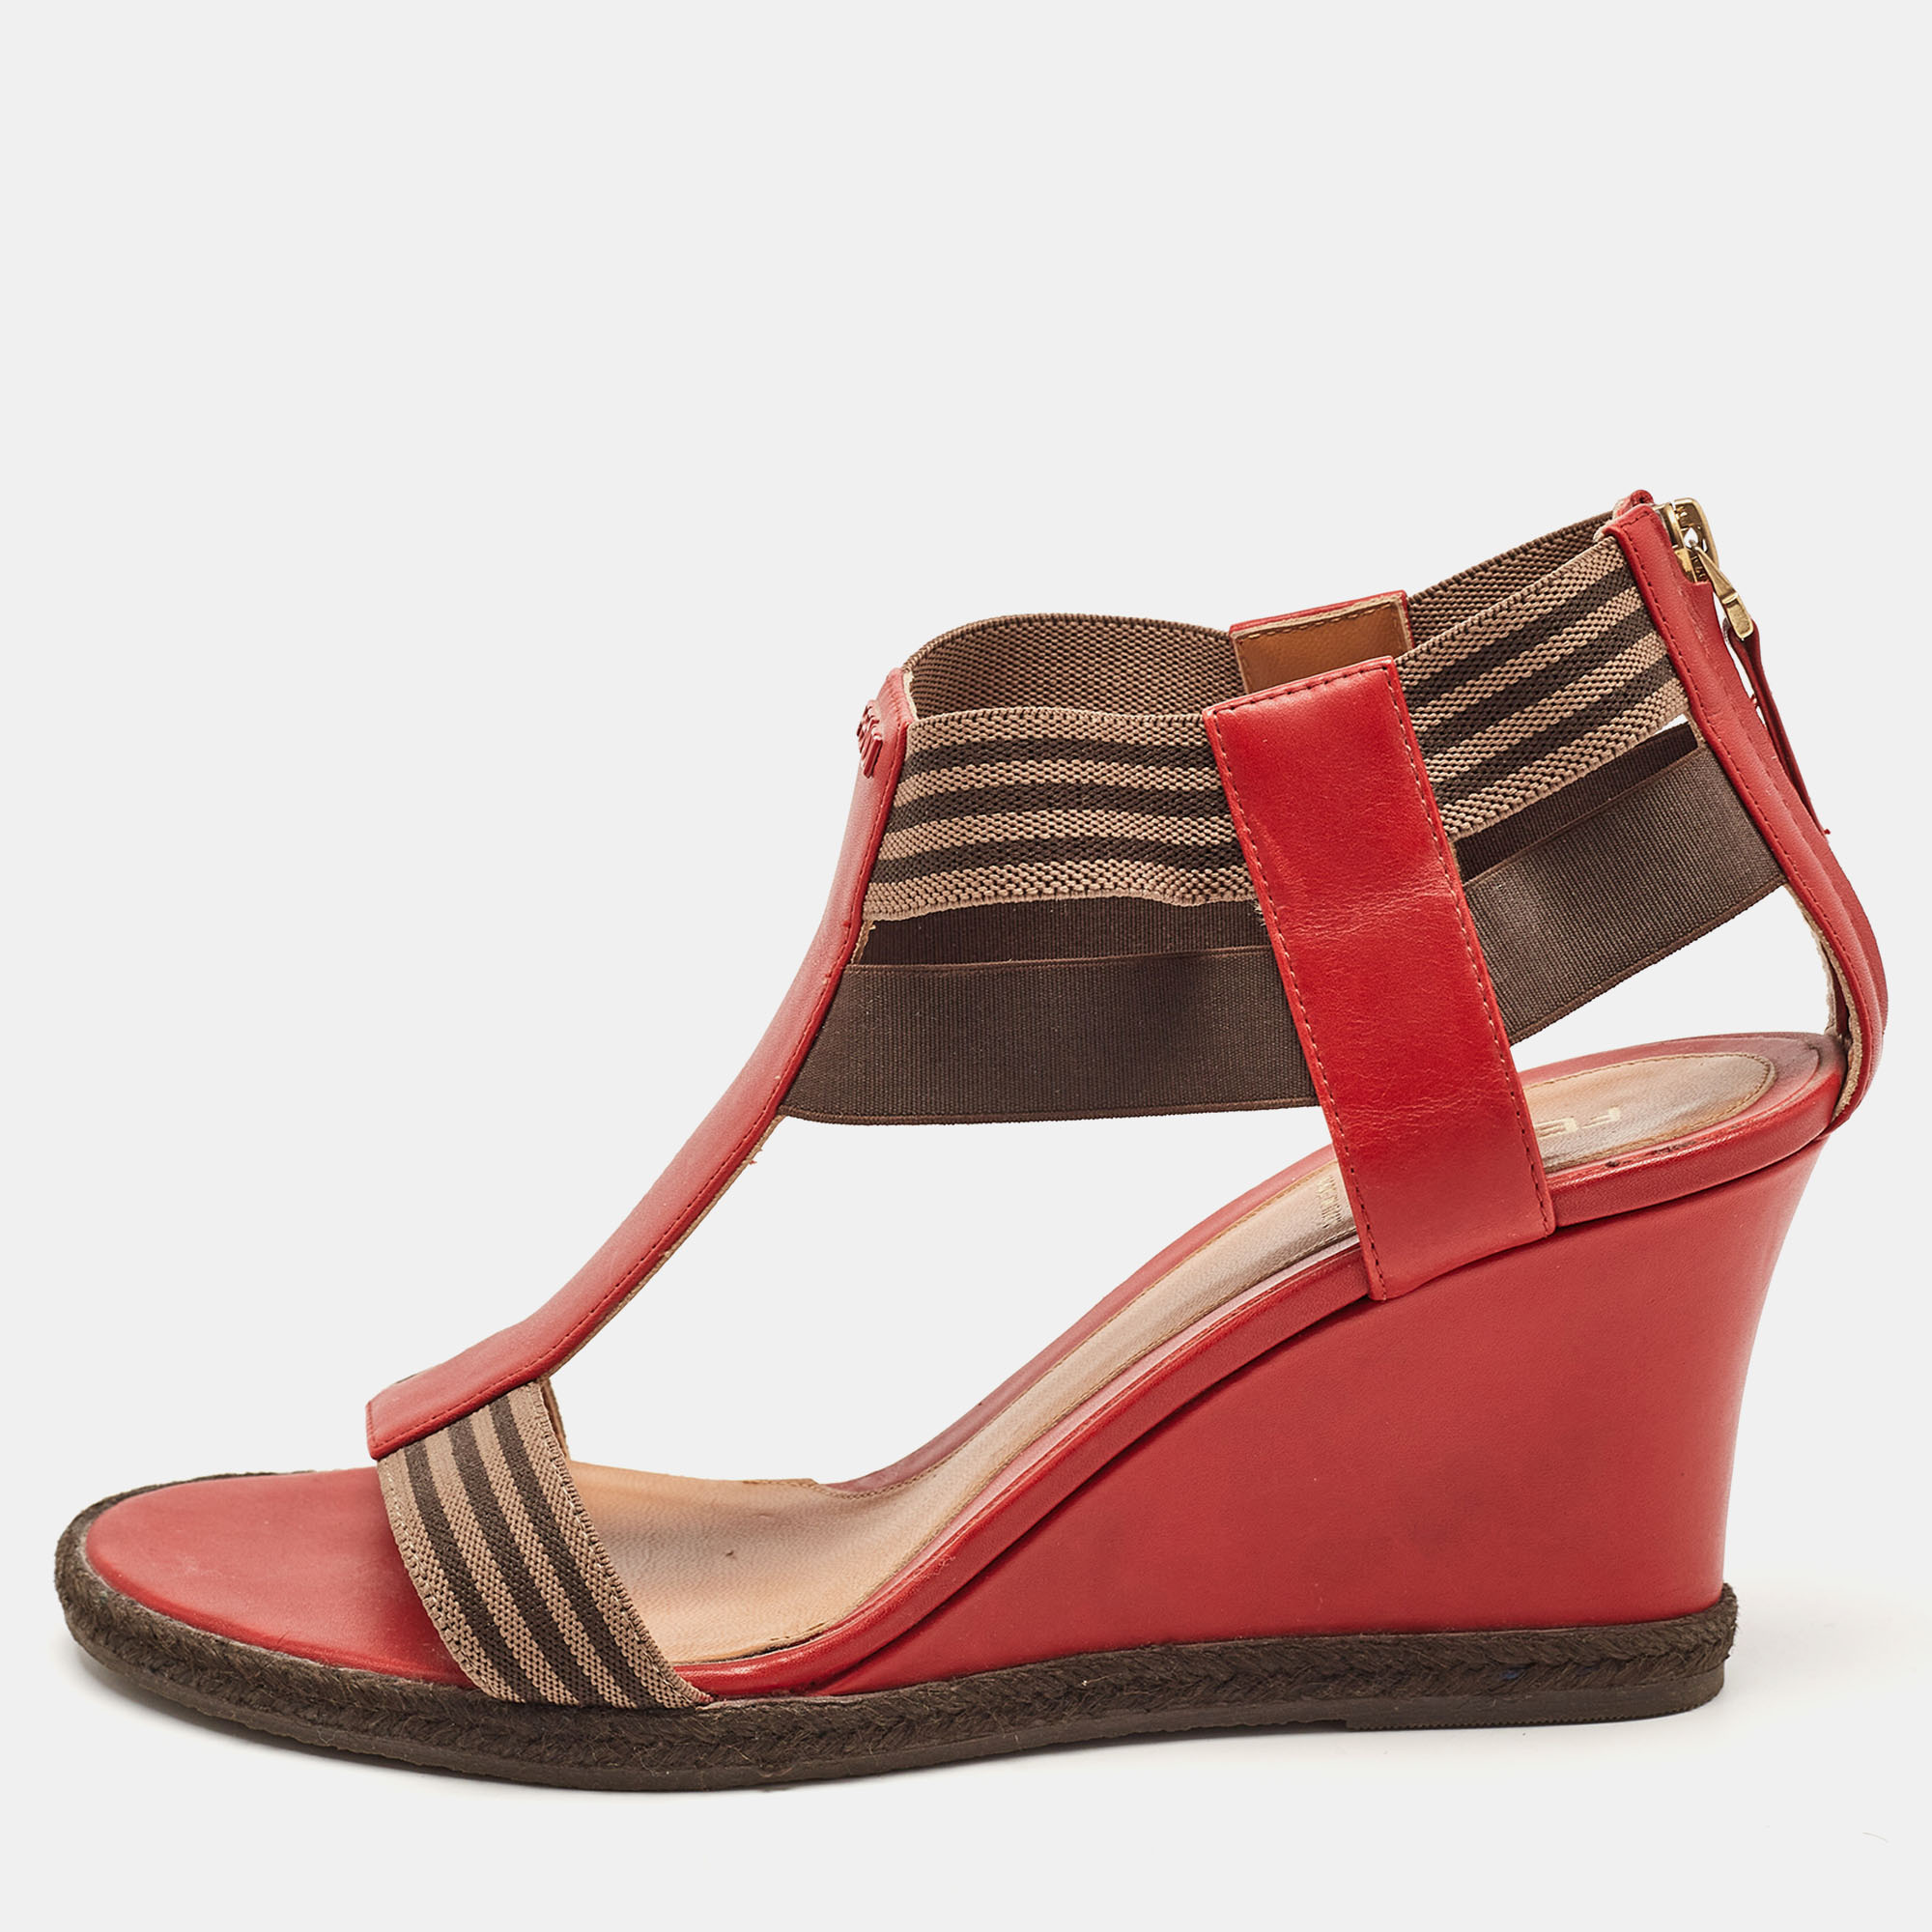 Fendi red/brown leather and elastic t-strap espadrille wedge sandals size 39